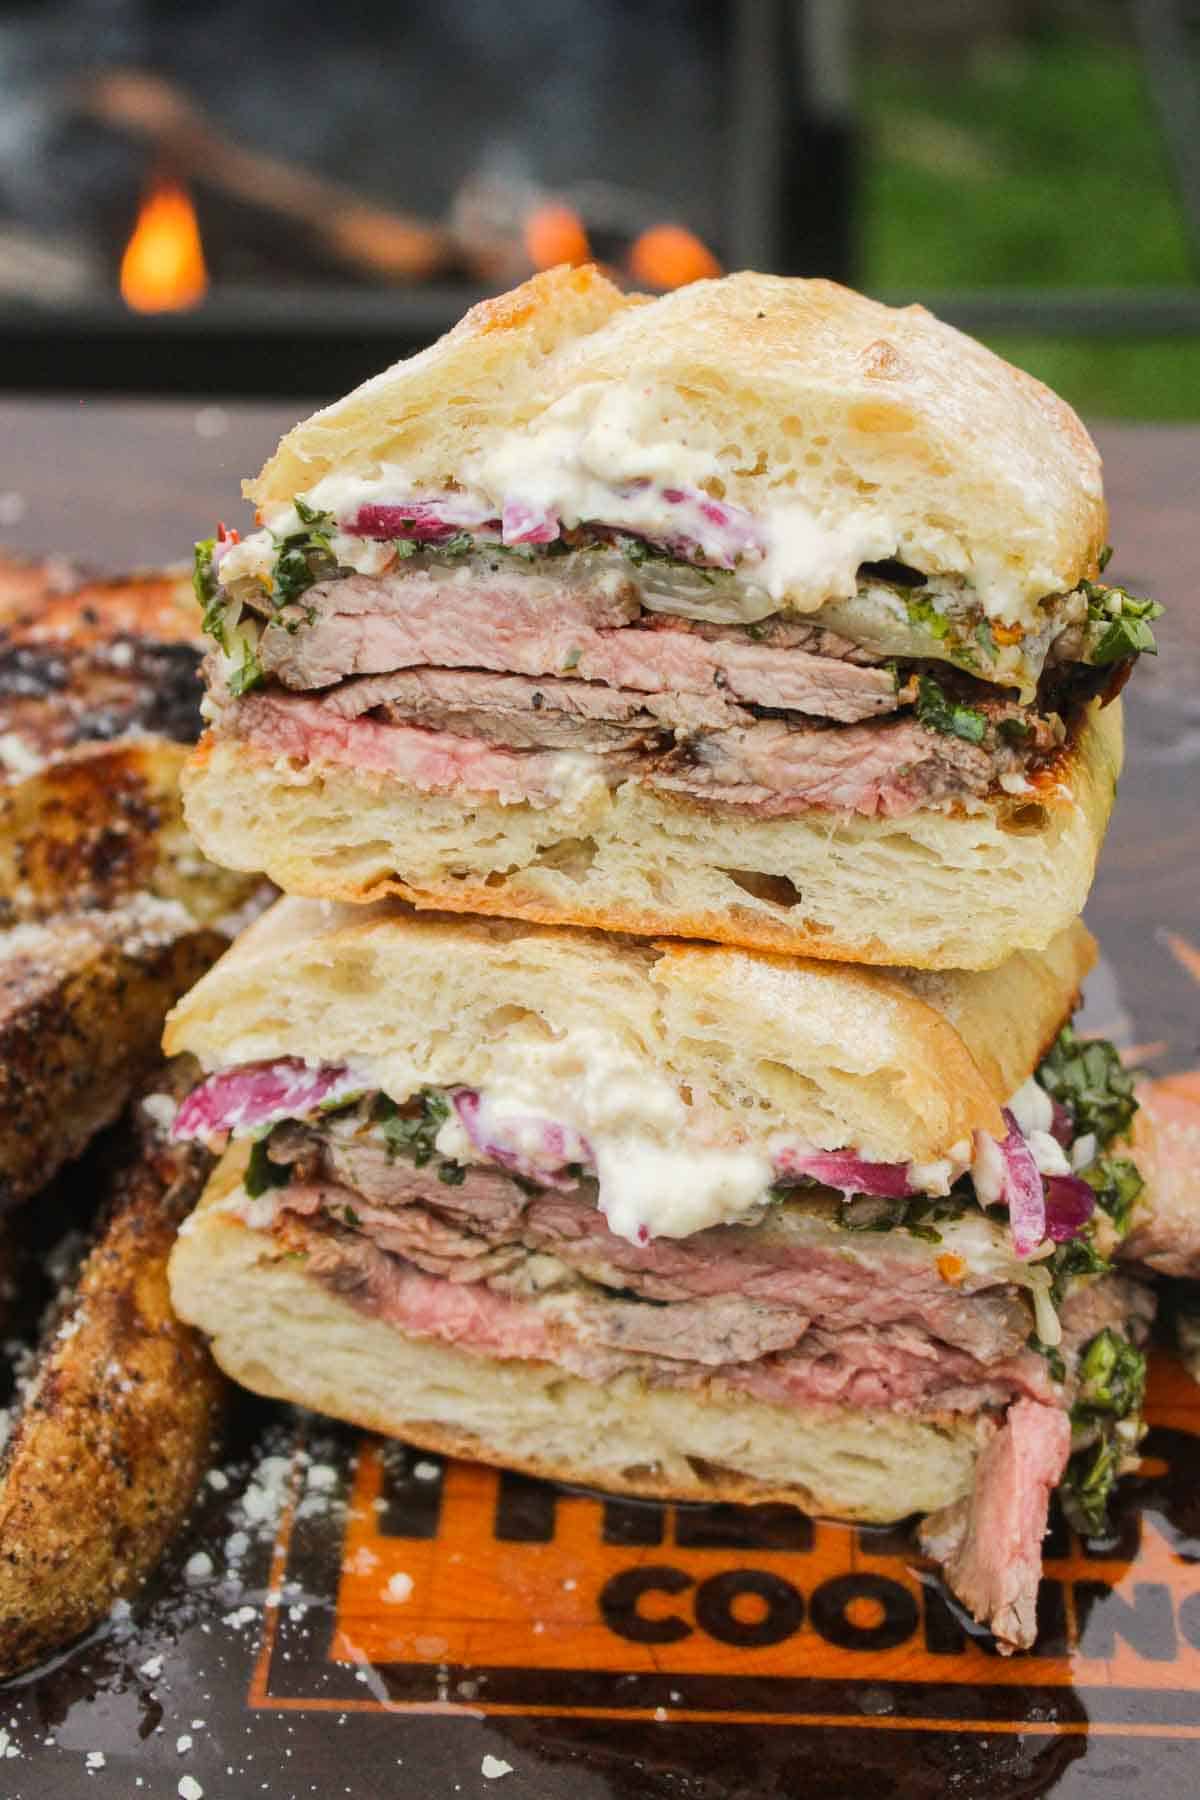 Chimichurri marinated tri-tip with grilled fries turned into a sandwich and ready to serve.